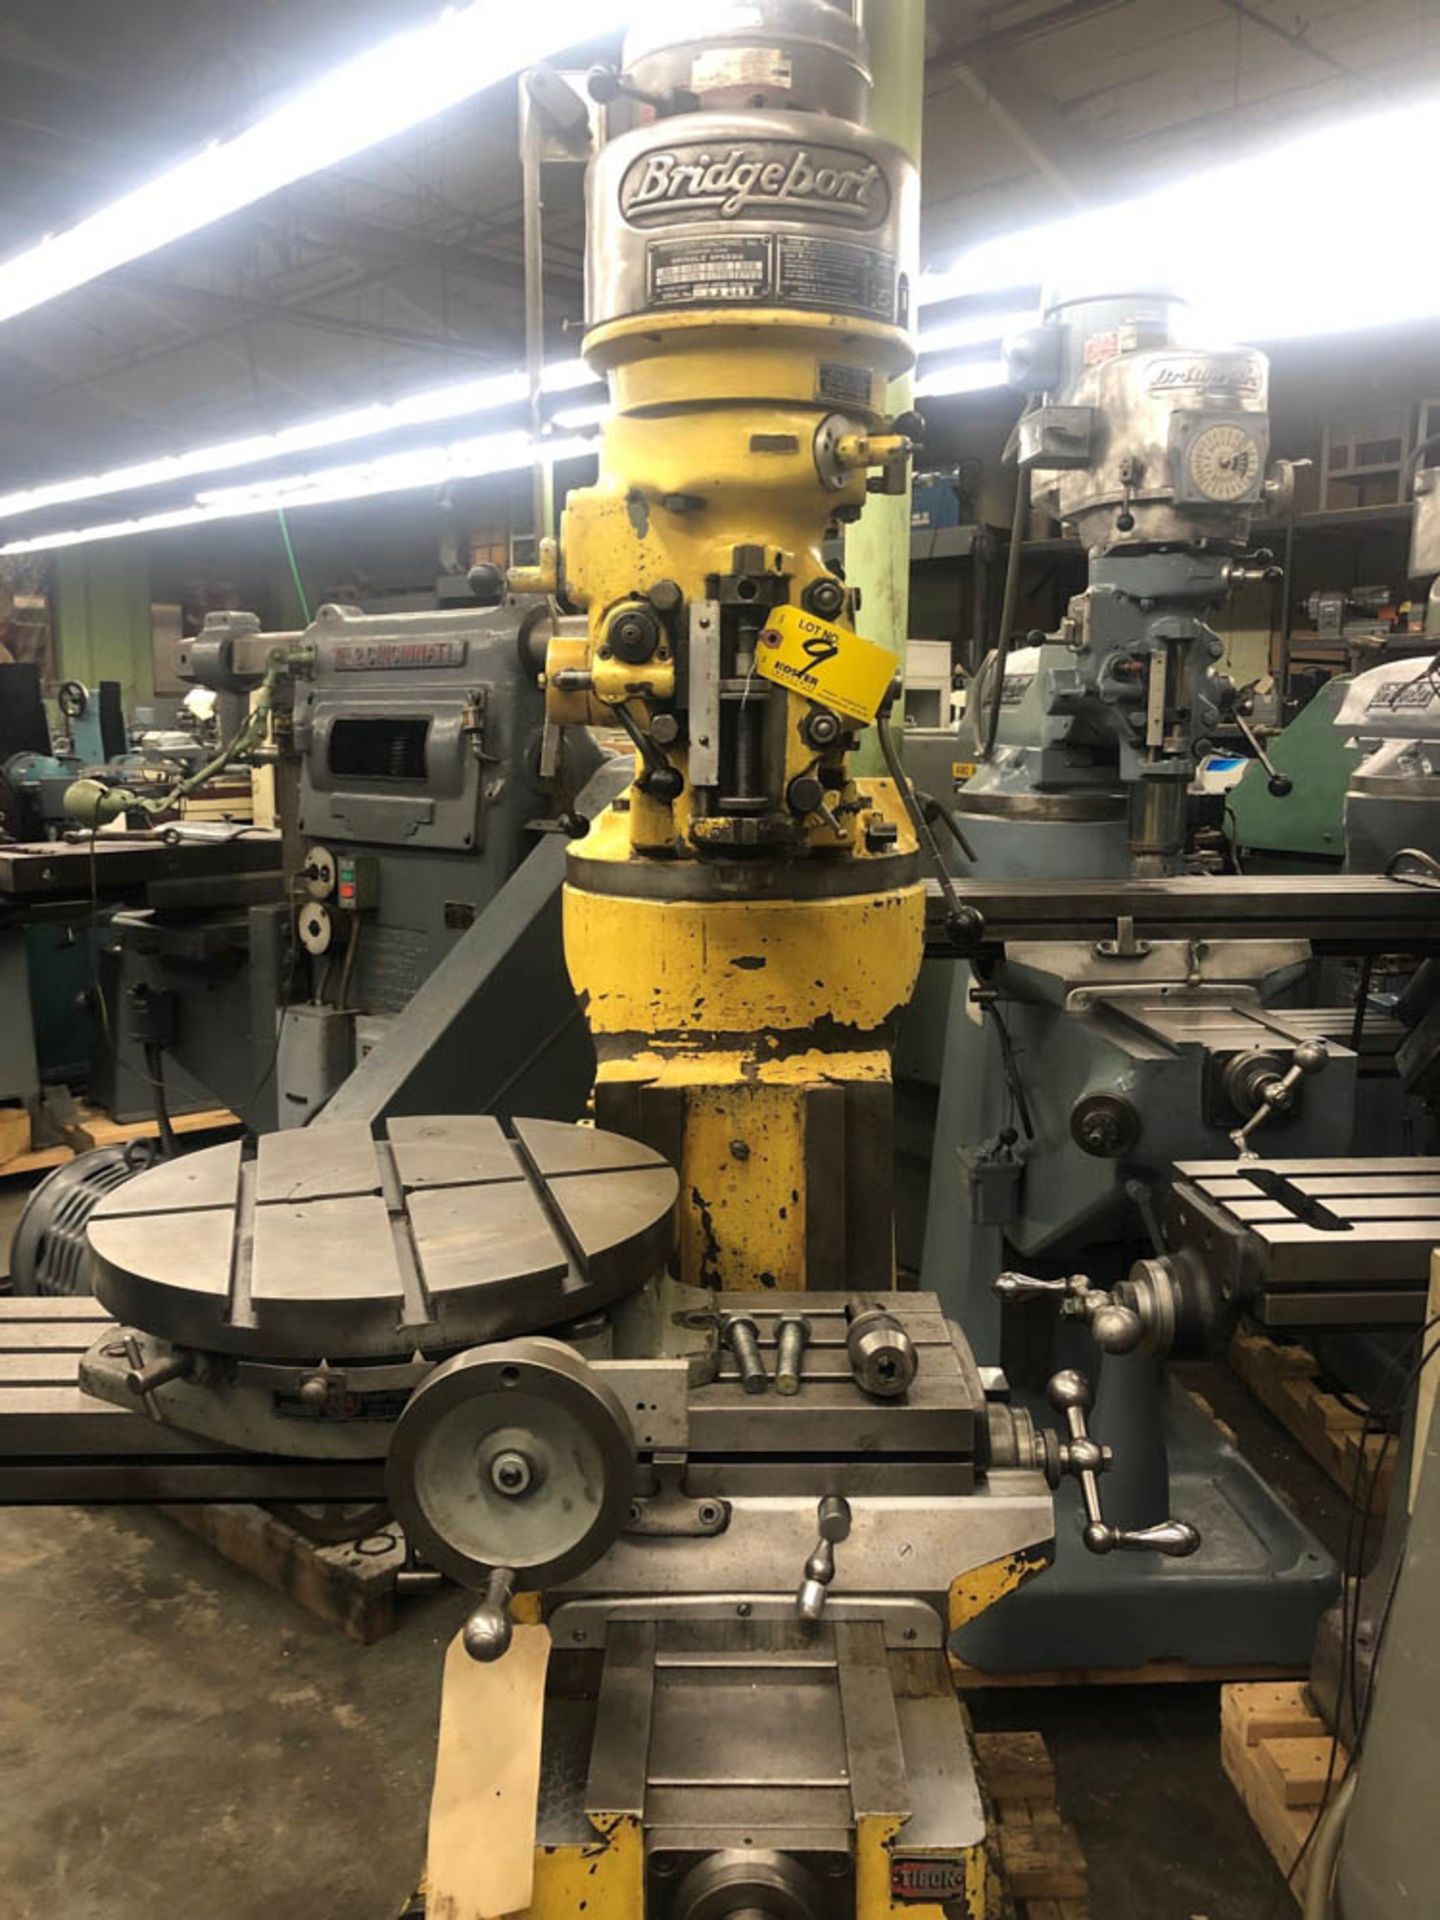 BRIDGEPORT 1HP VERTICAL MILLING MACHINE, 80-2720 RPM, 9" X 36" TABLE, S/N: 12BR 62544 (YELLOW) - Image 2 of 5